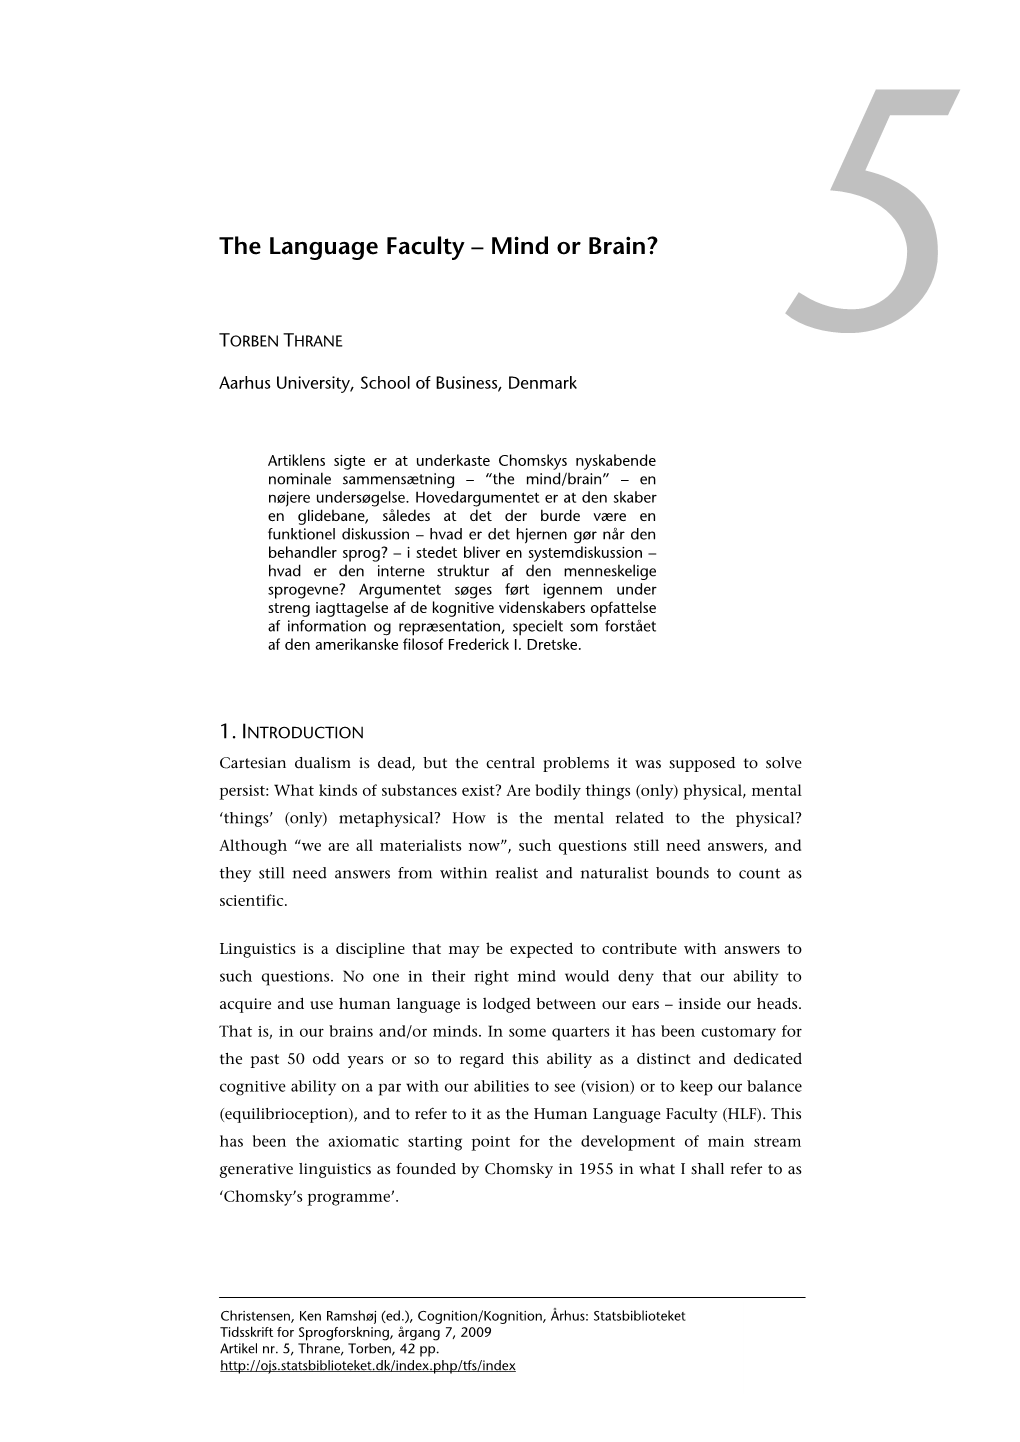 The Language Faculty – Mind Or Brain?